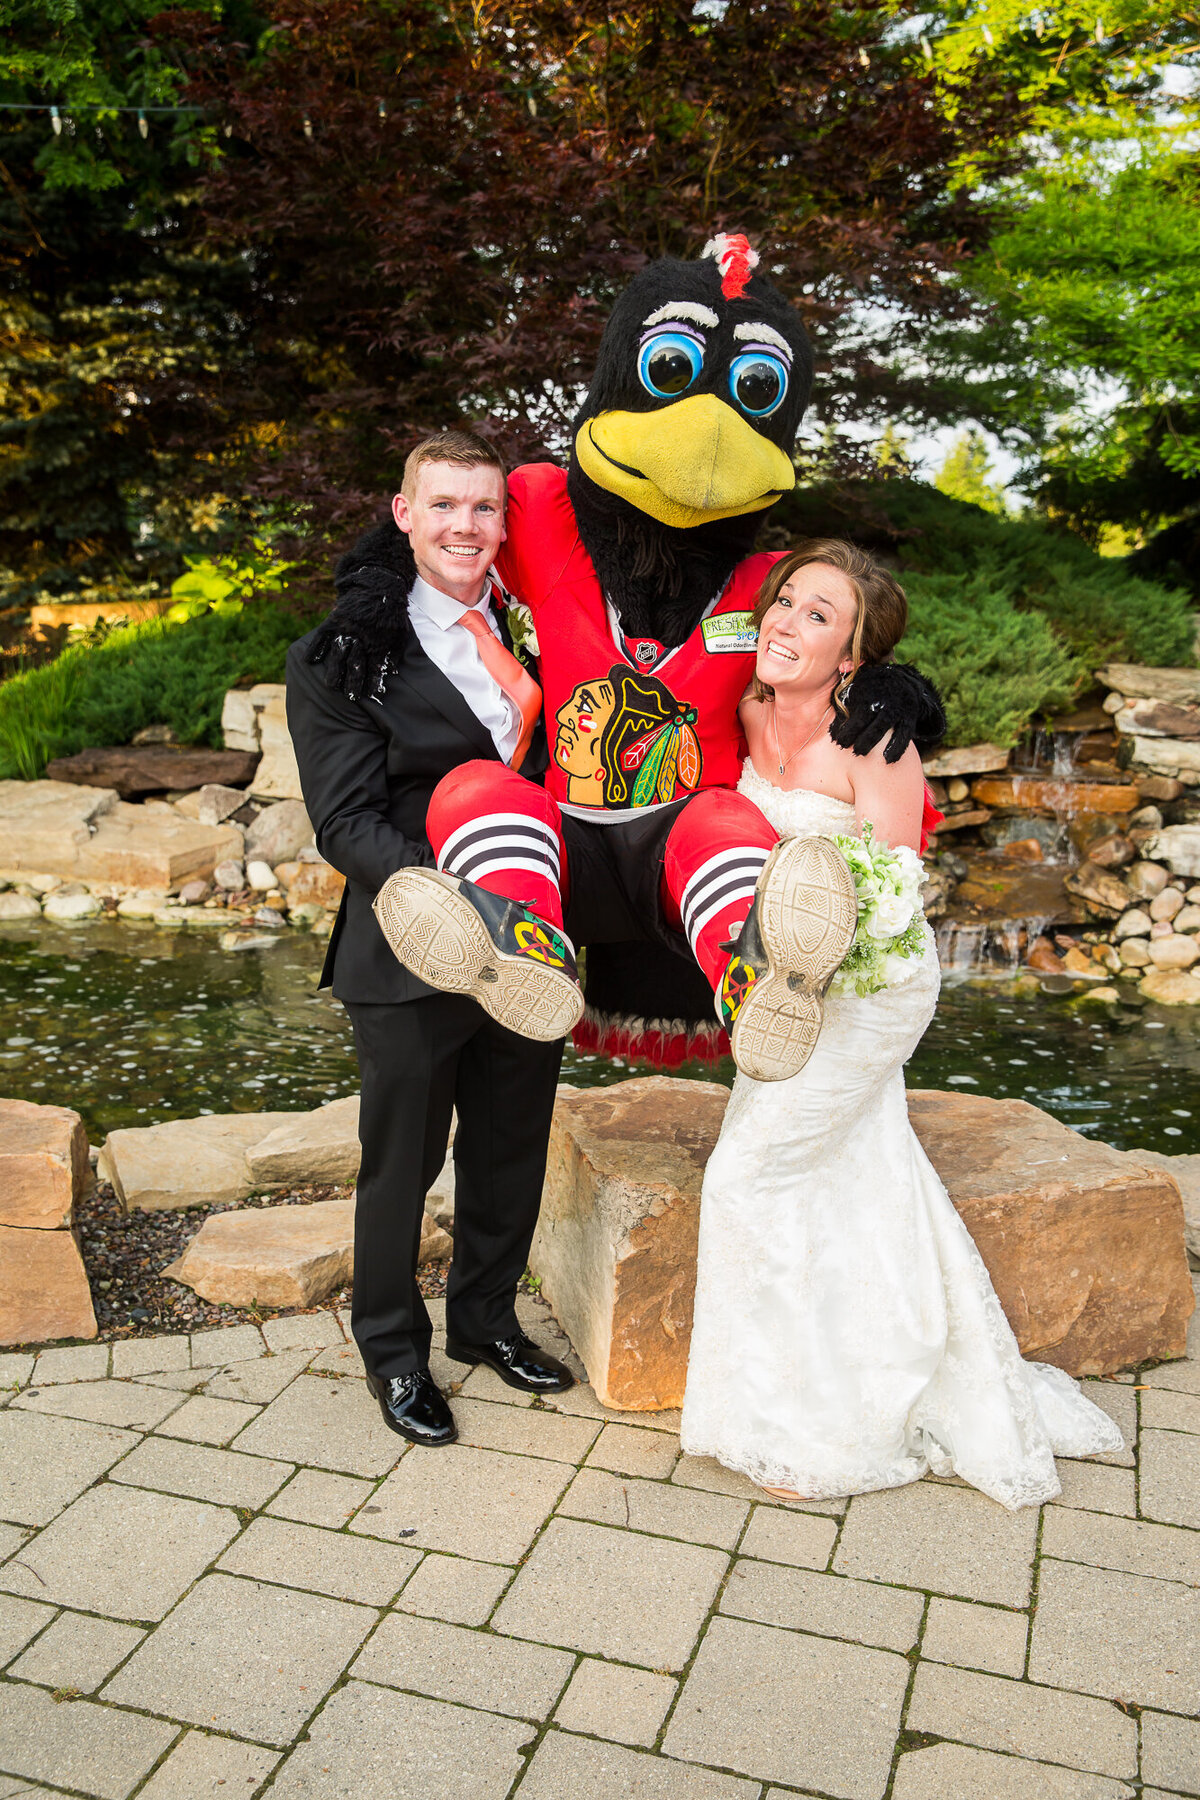 A fun bride and groom pose with the Tommy Hawk mascot from the Blackhawks